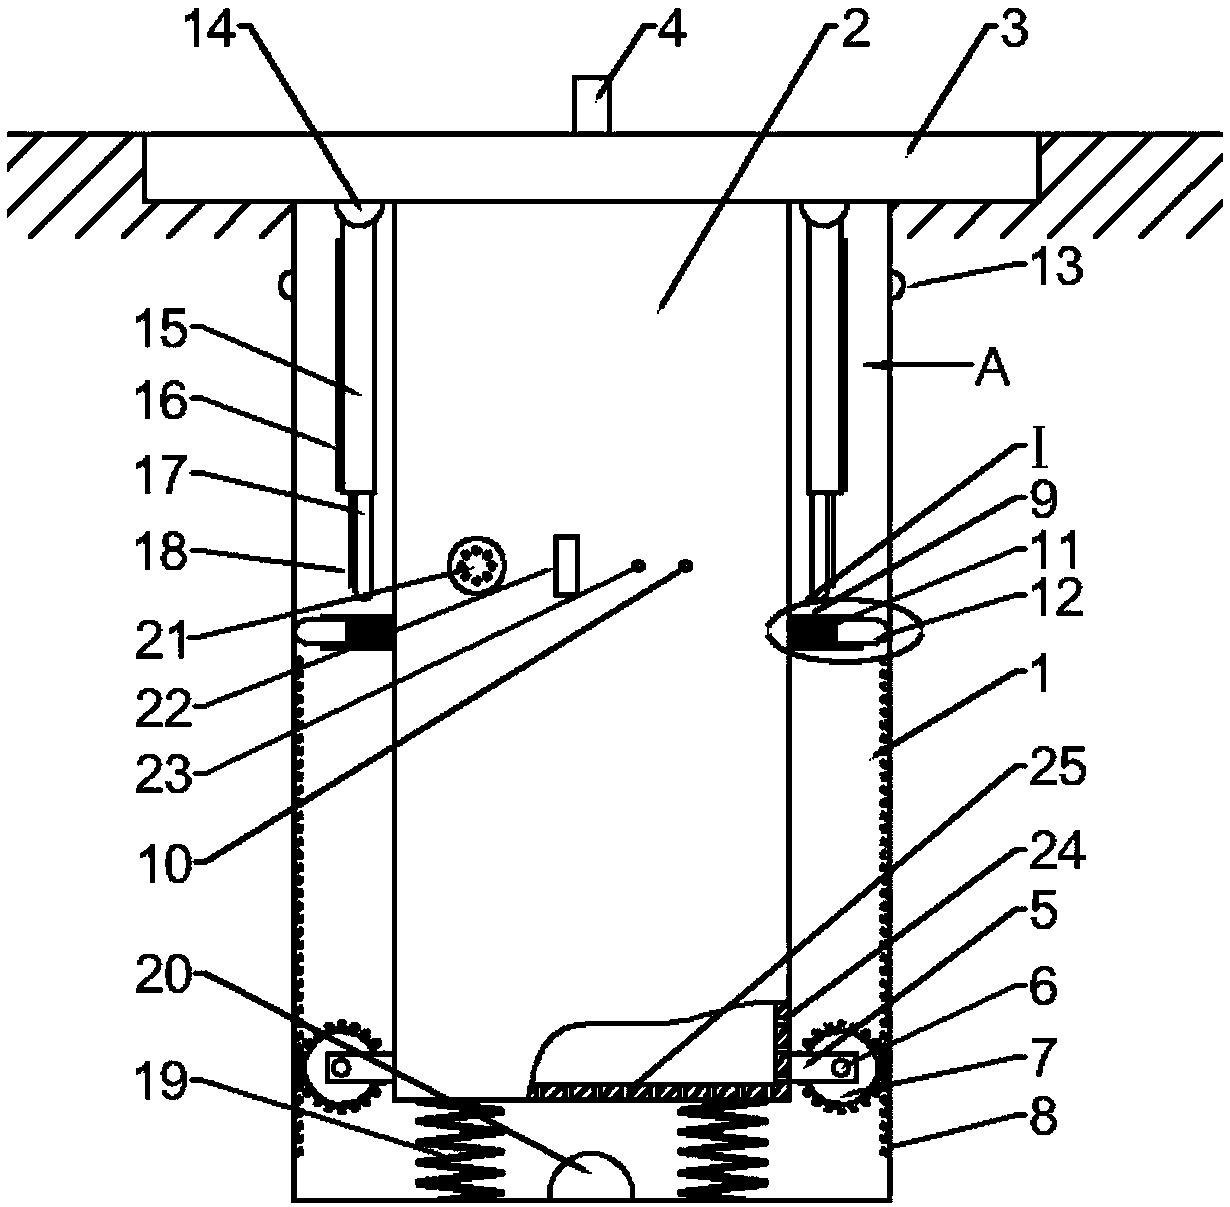 A concealed charging pile mounting structure